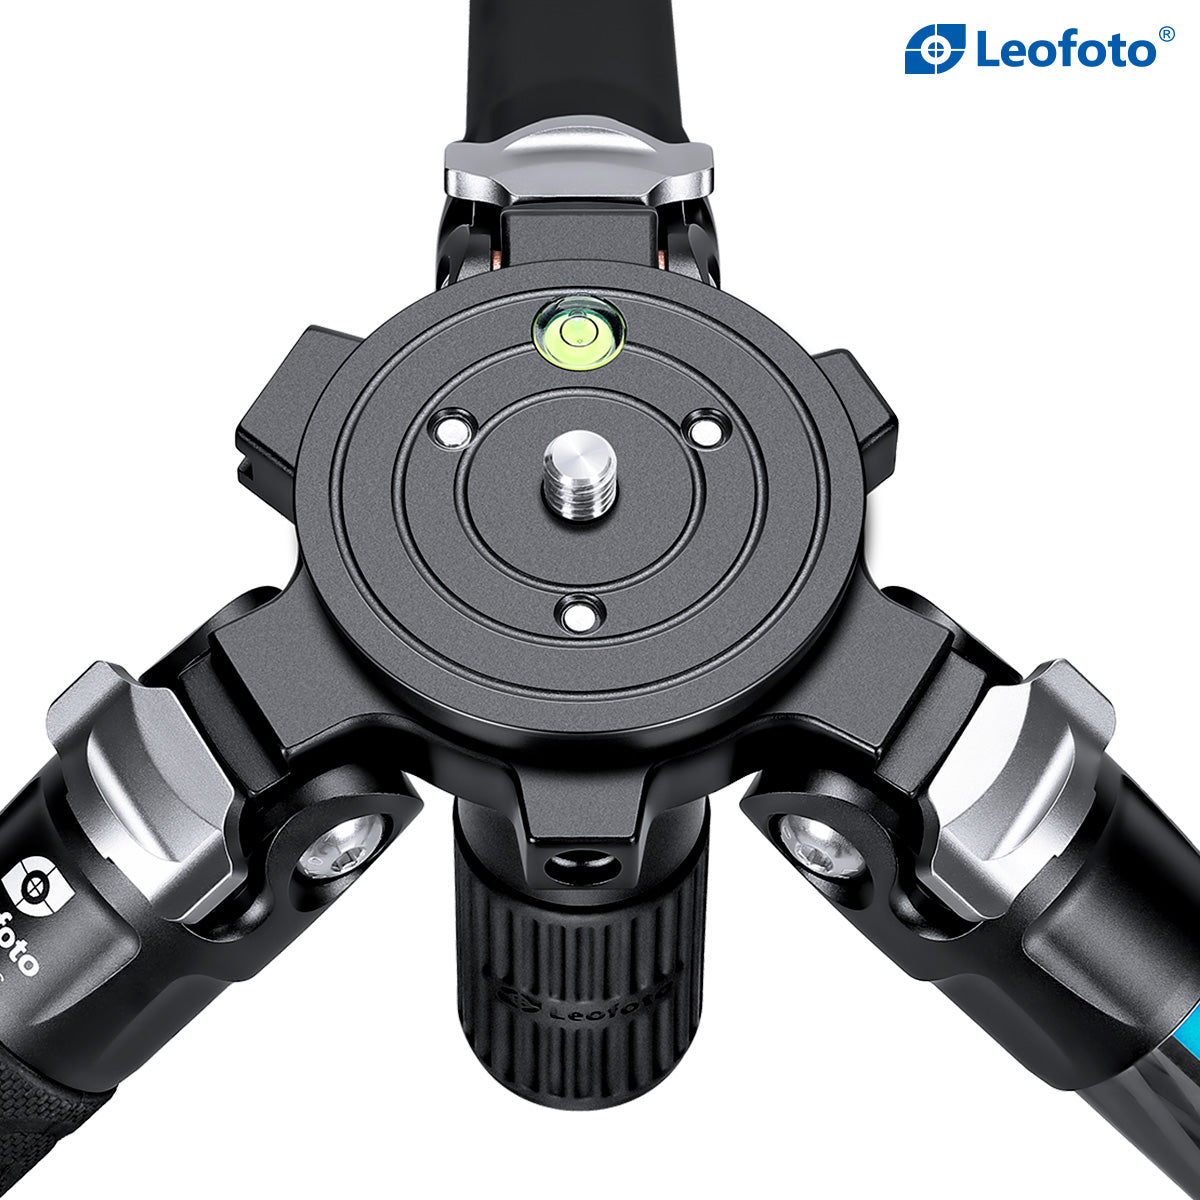 Leofoto LVM Spider with 75mm Integrated bowl, leveling base, and silicone handle for 32mm max tubes